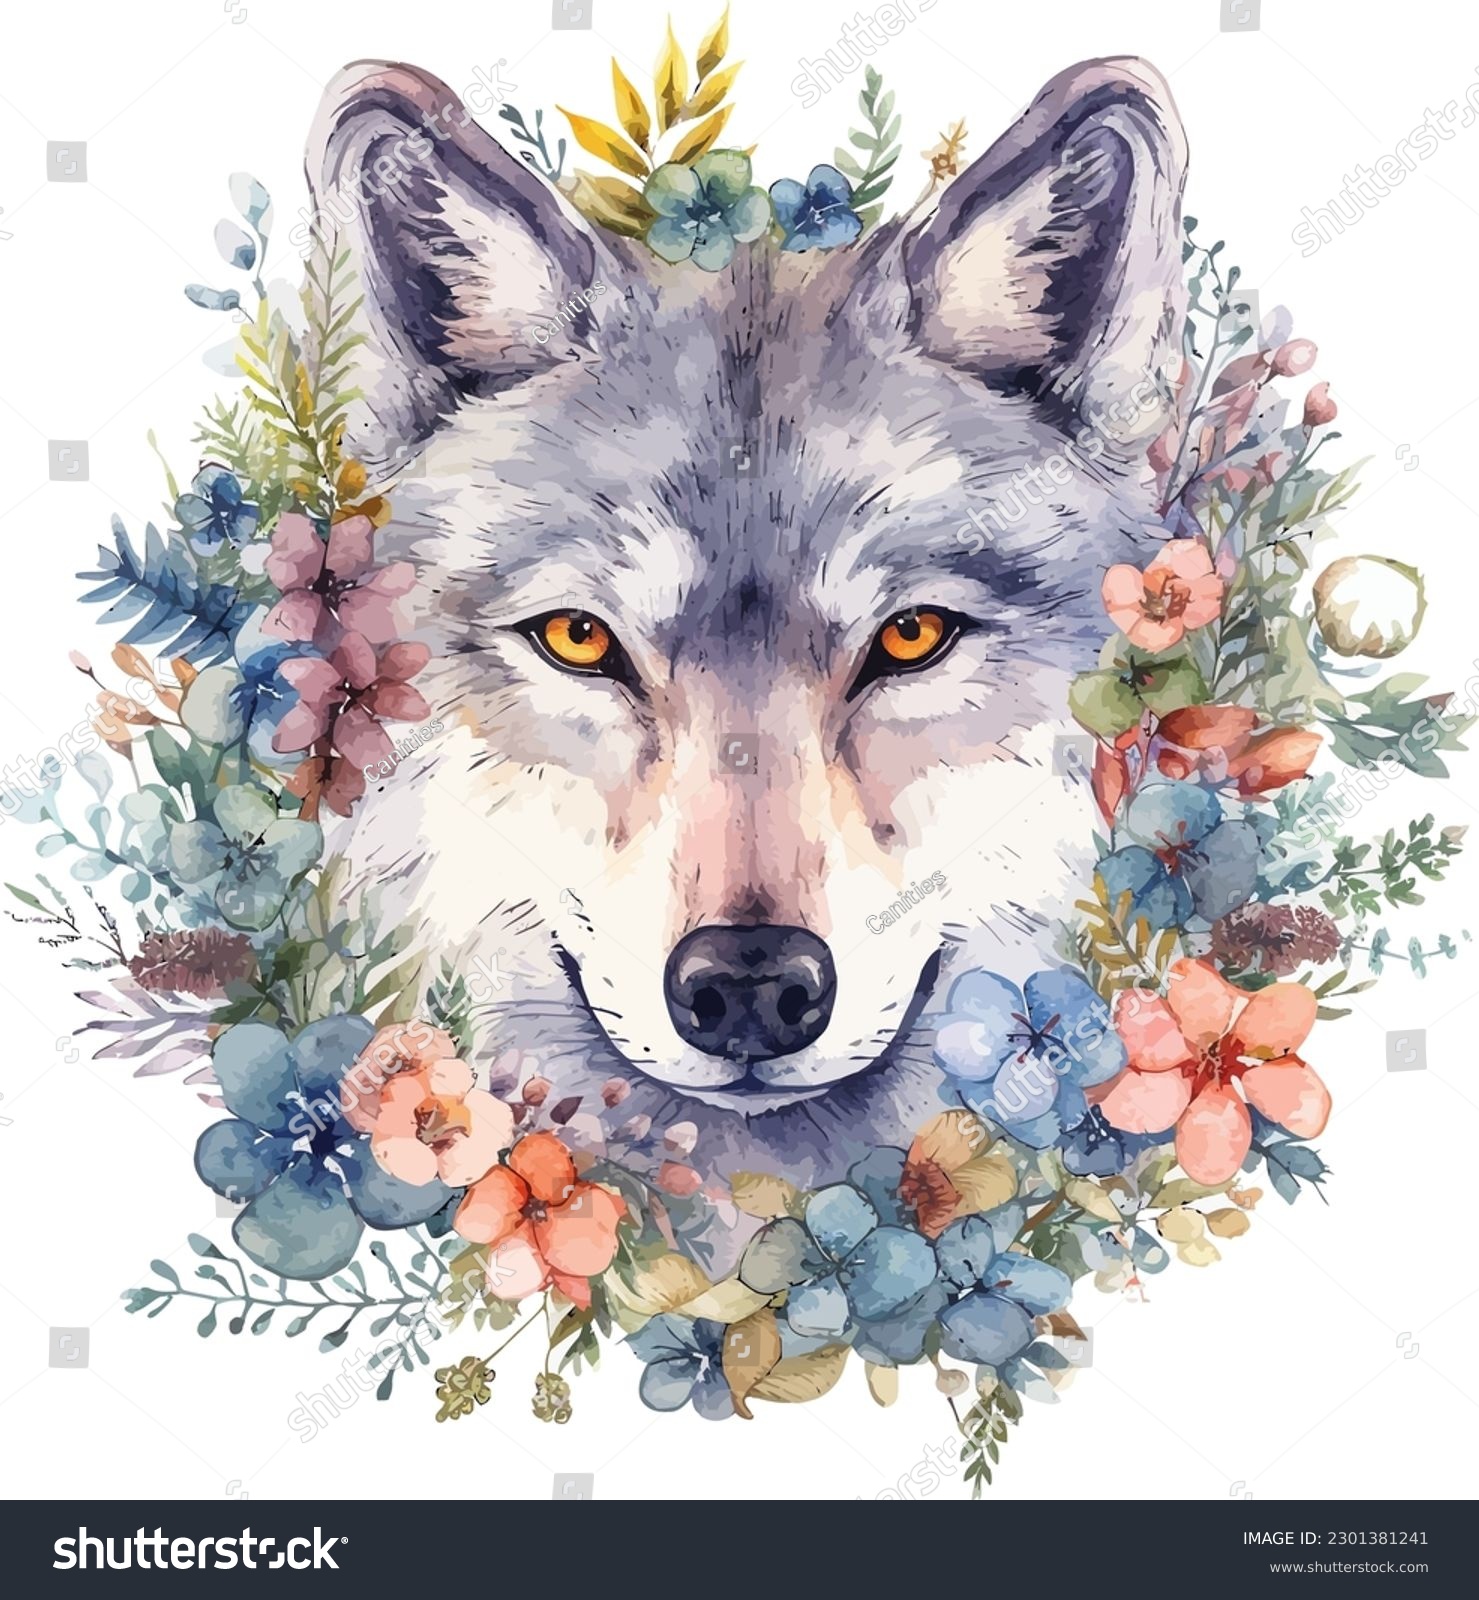 SVG of Watercolor painting of a wolf with flowers wreath. Isolated on white background. svg